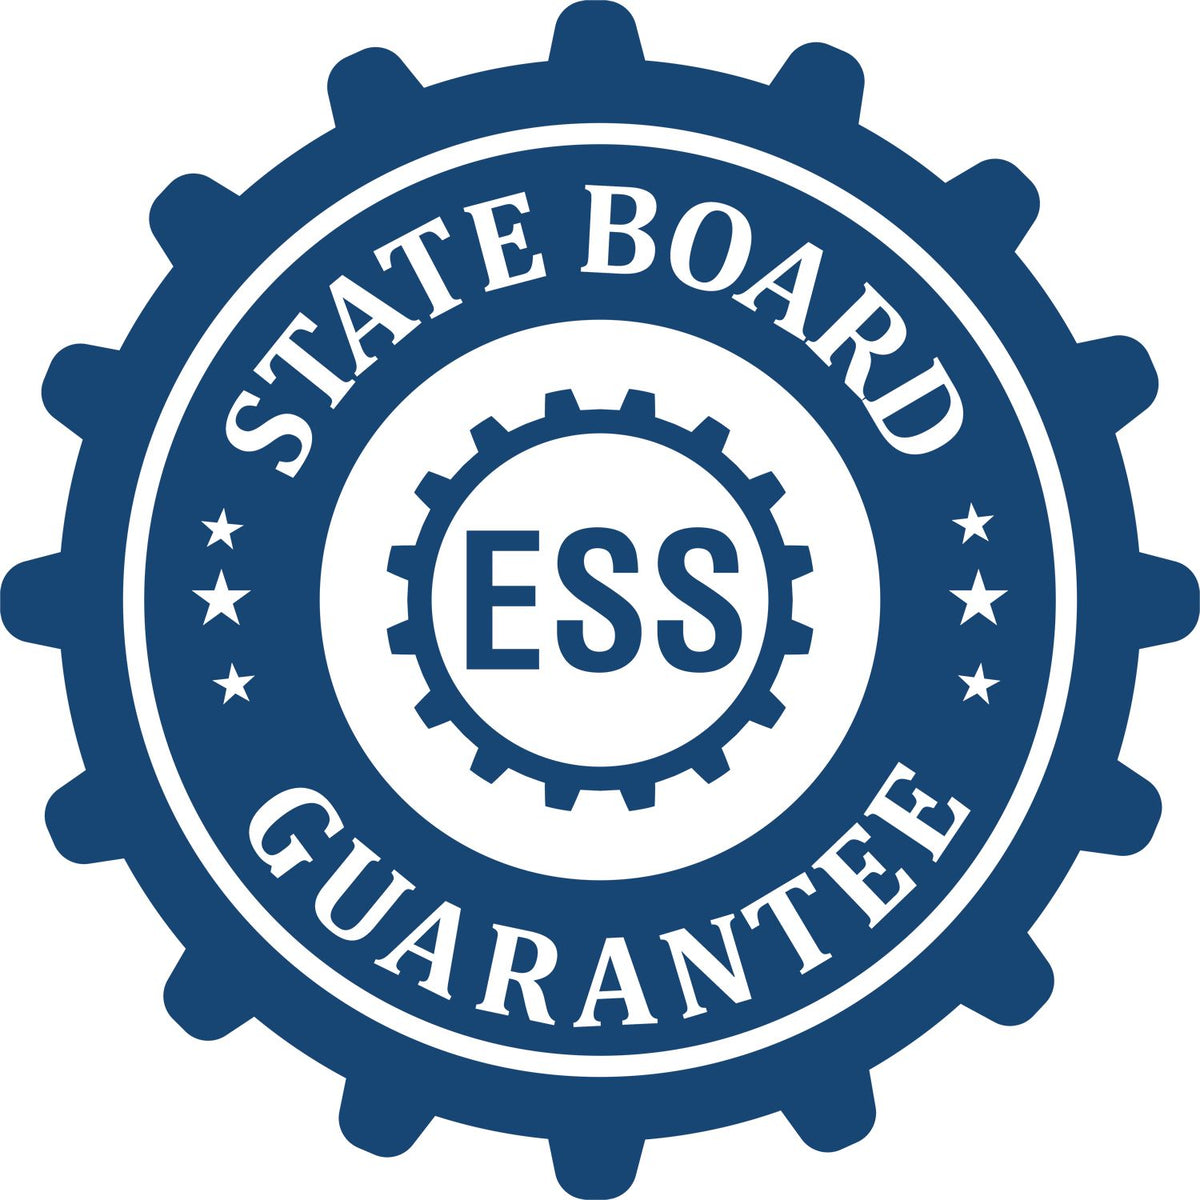 An emblem in a gear shape illustrating a state board guarantee for the Handheld Virginia Professional Geologist Embosser